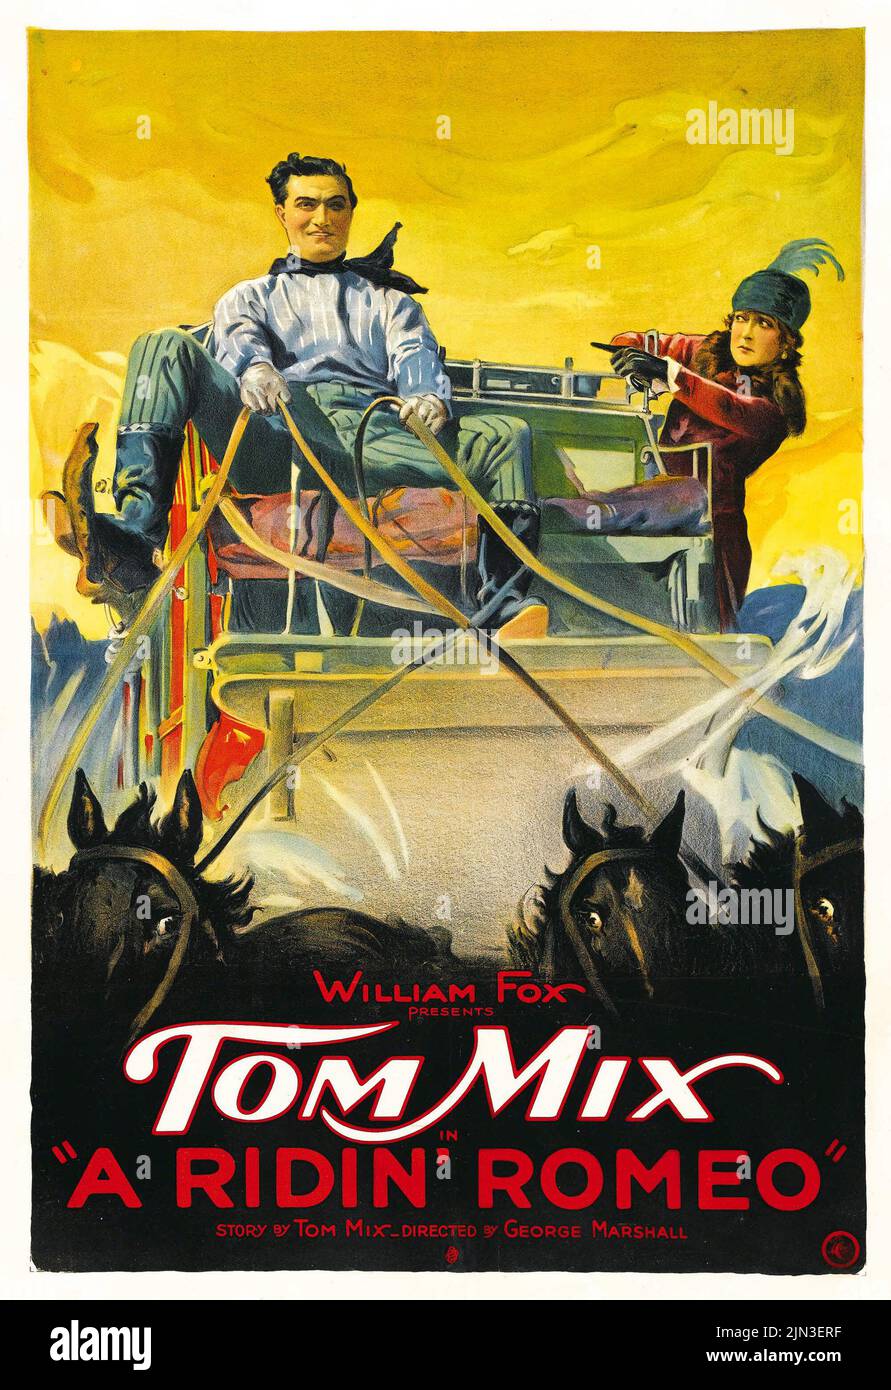 A Ridin' Romeo (Fox, 1921). Vintage film poster. Tom Mix wrote and starred in the story of Jim Rose Stock Photo